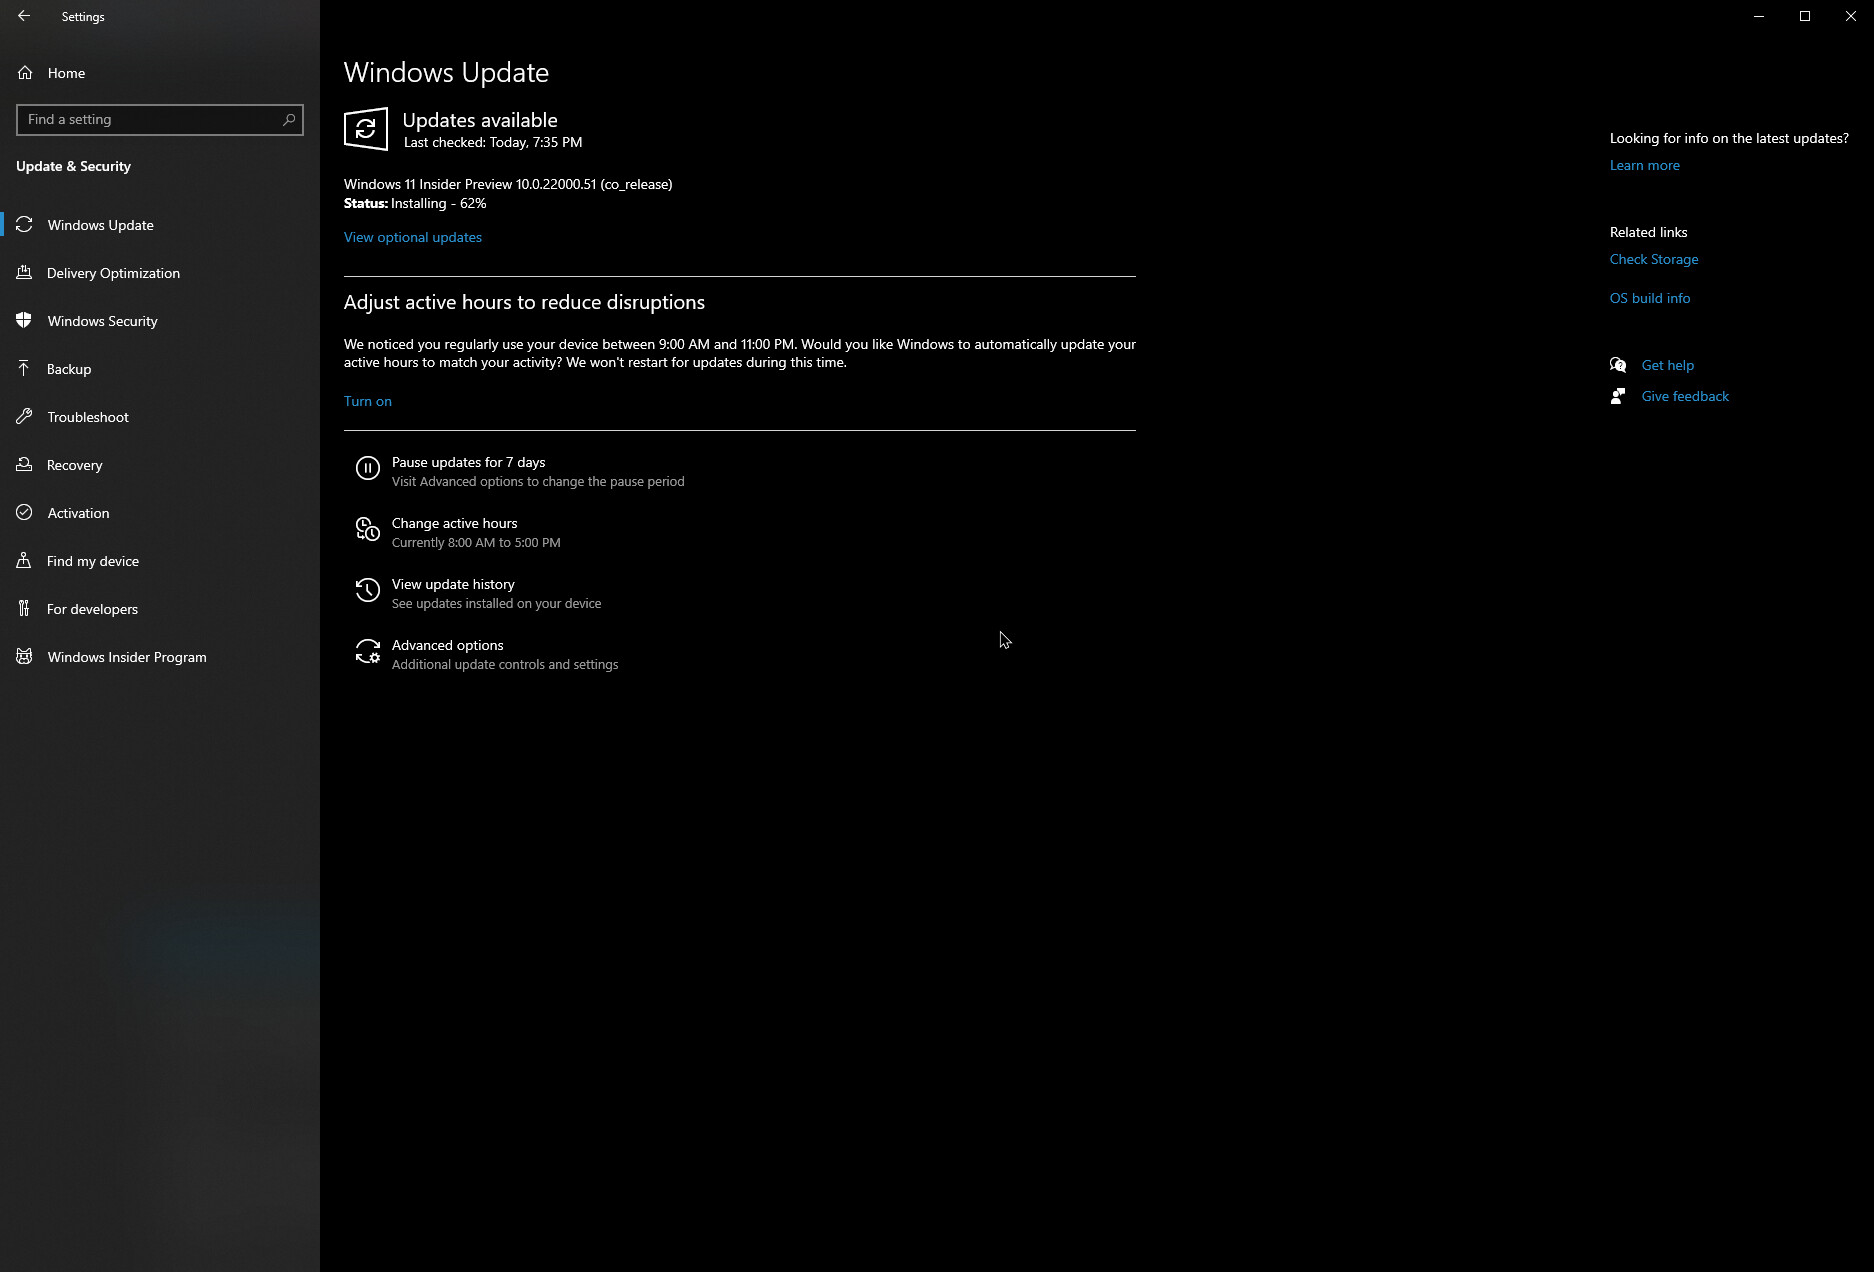 Windows 11 Insider Preview is now avilable on Windows Update ...